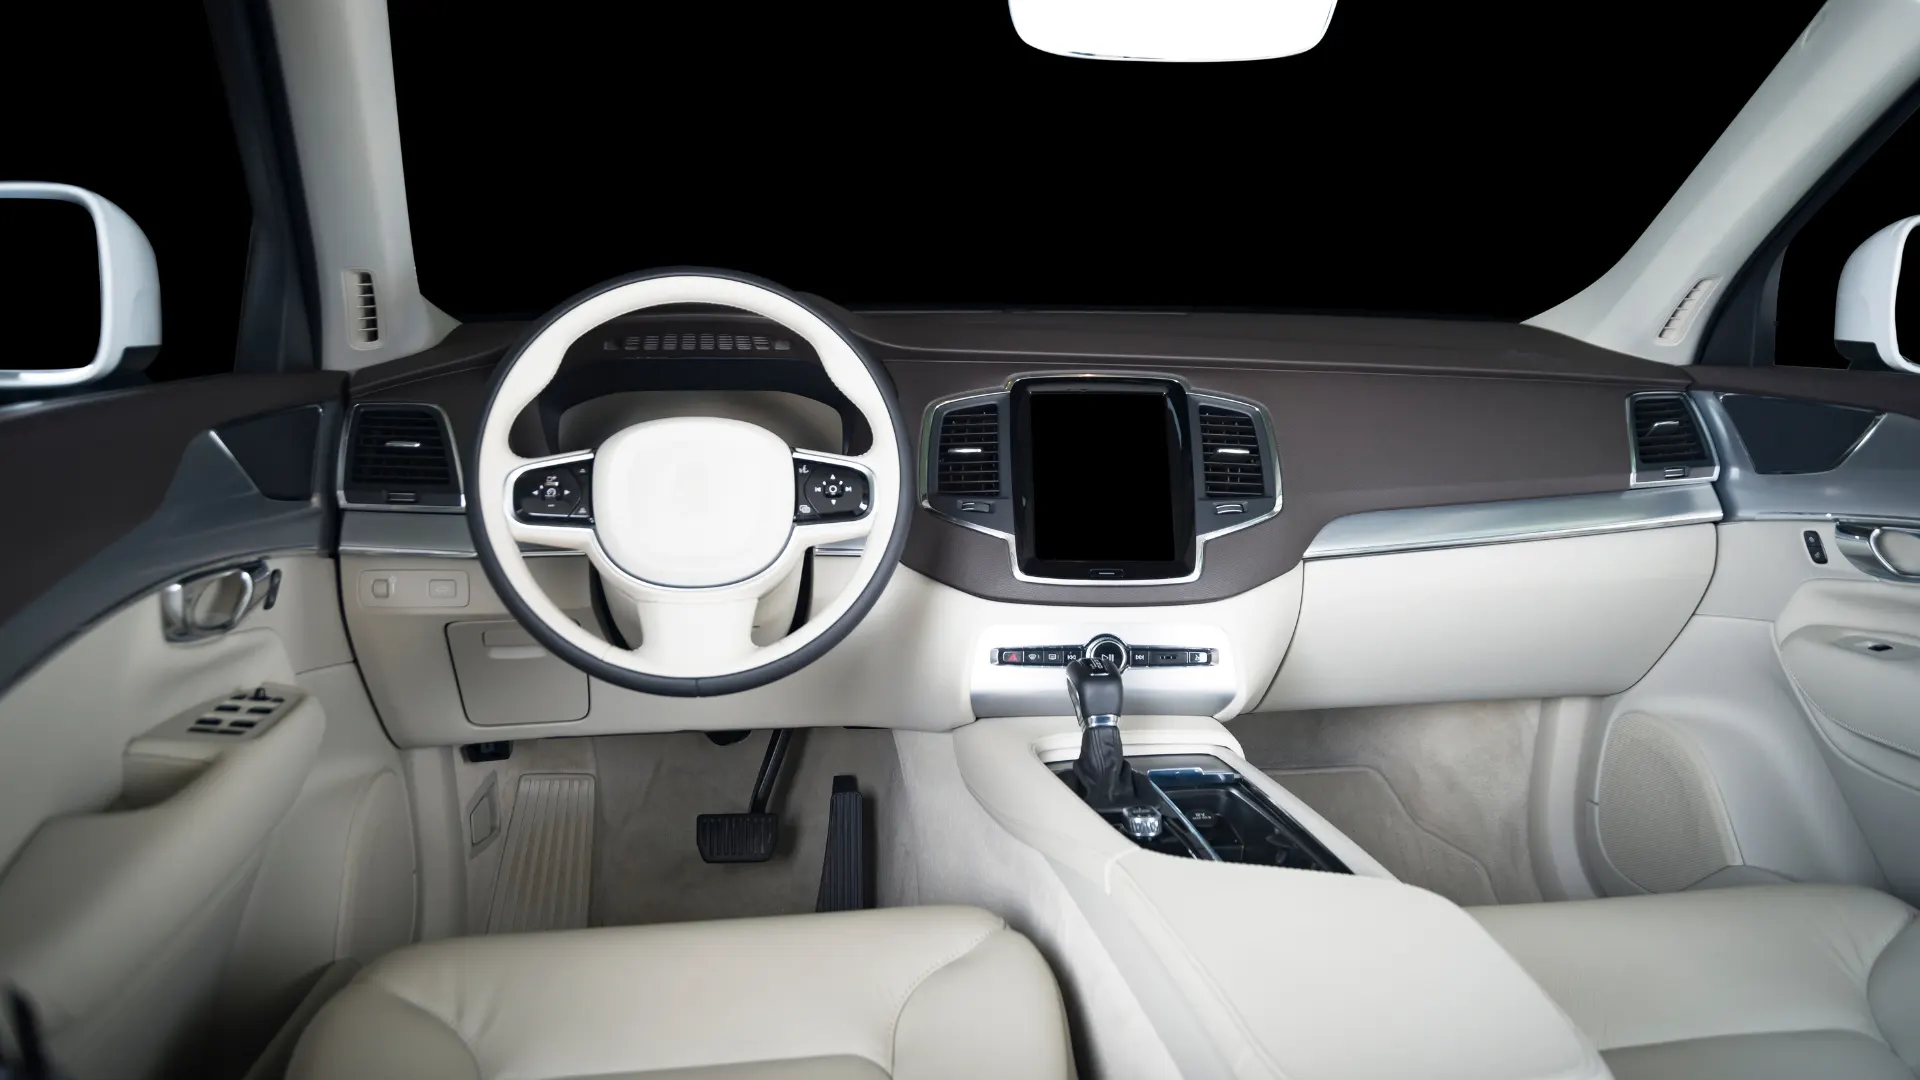 The interior of a luxury automobile lit up really bright